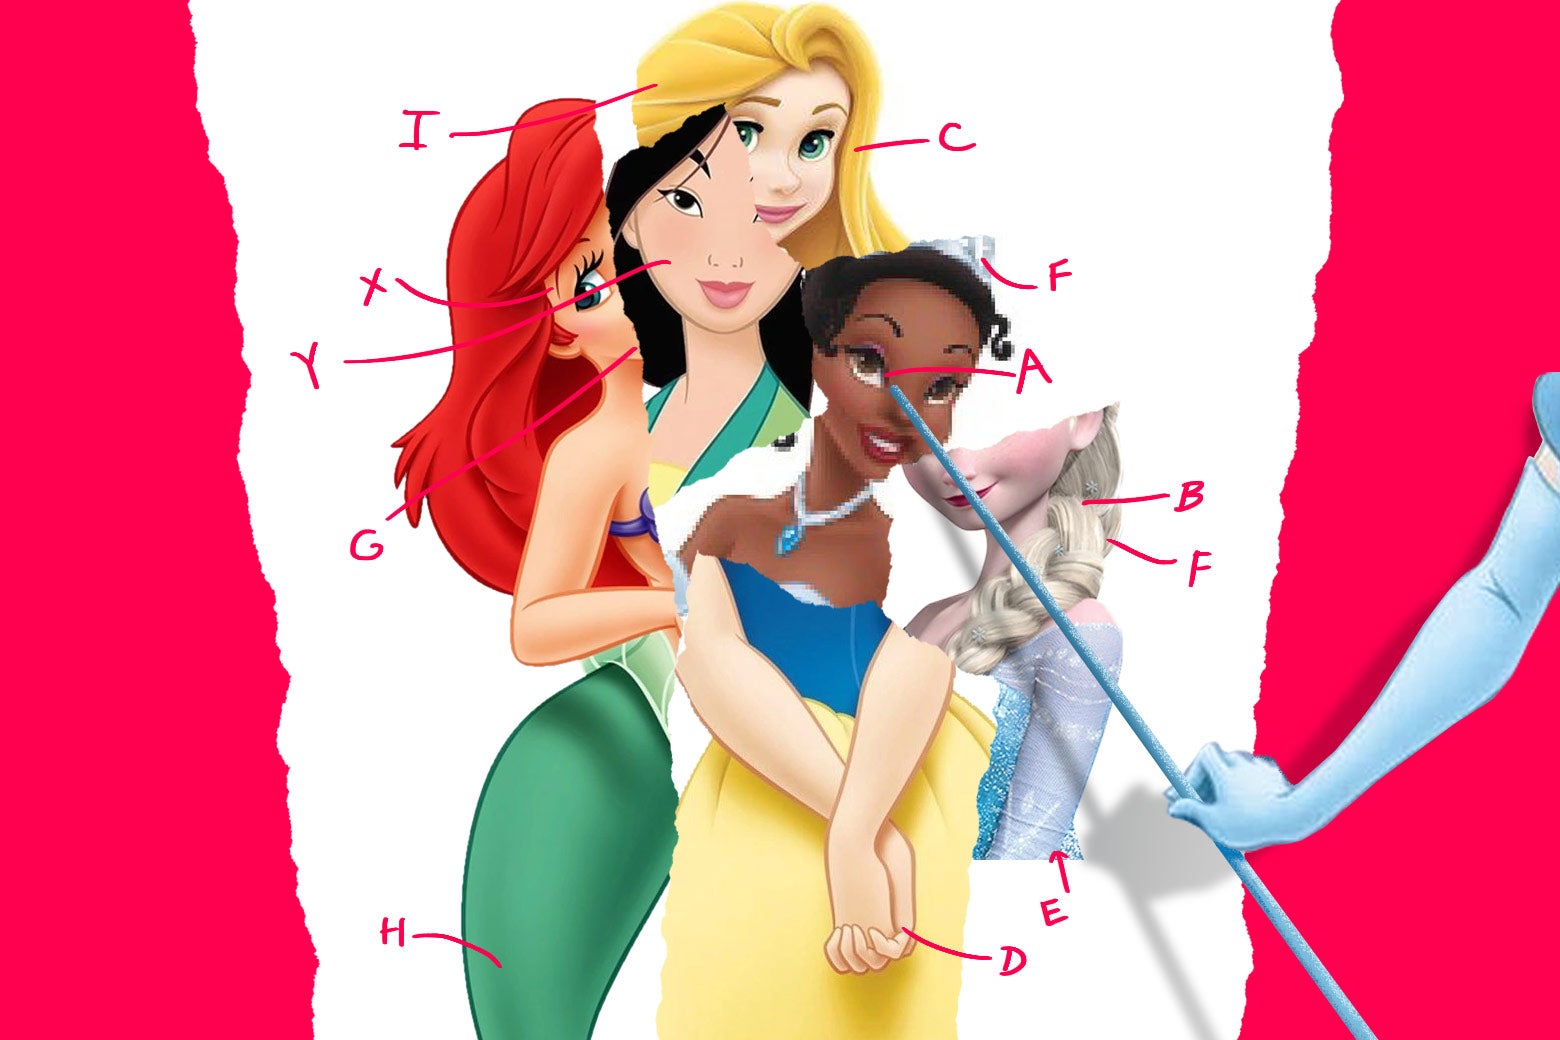 Why are we so obsessed with Disney princesses? pic pic